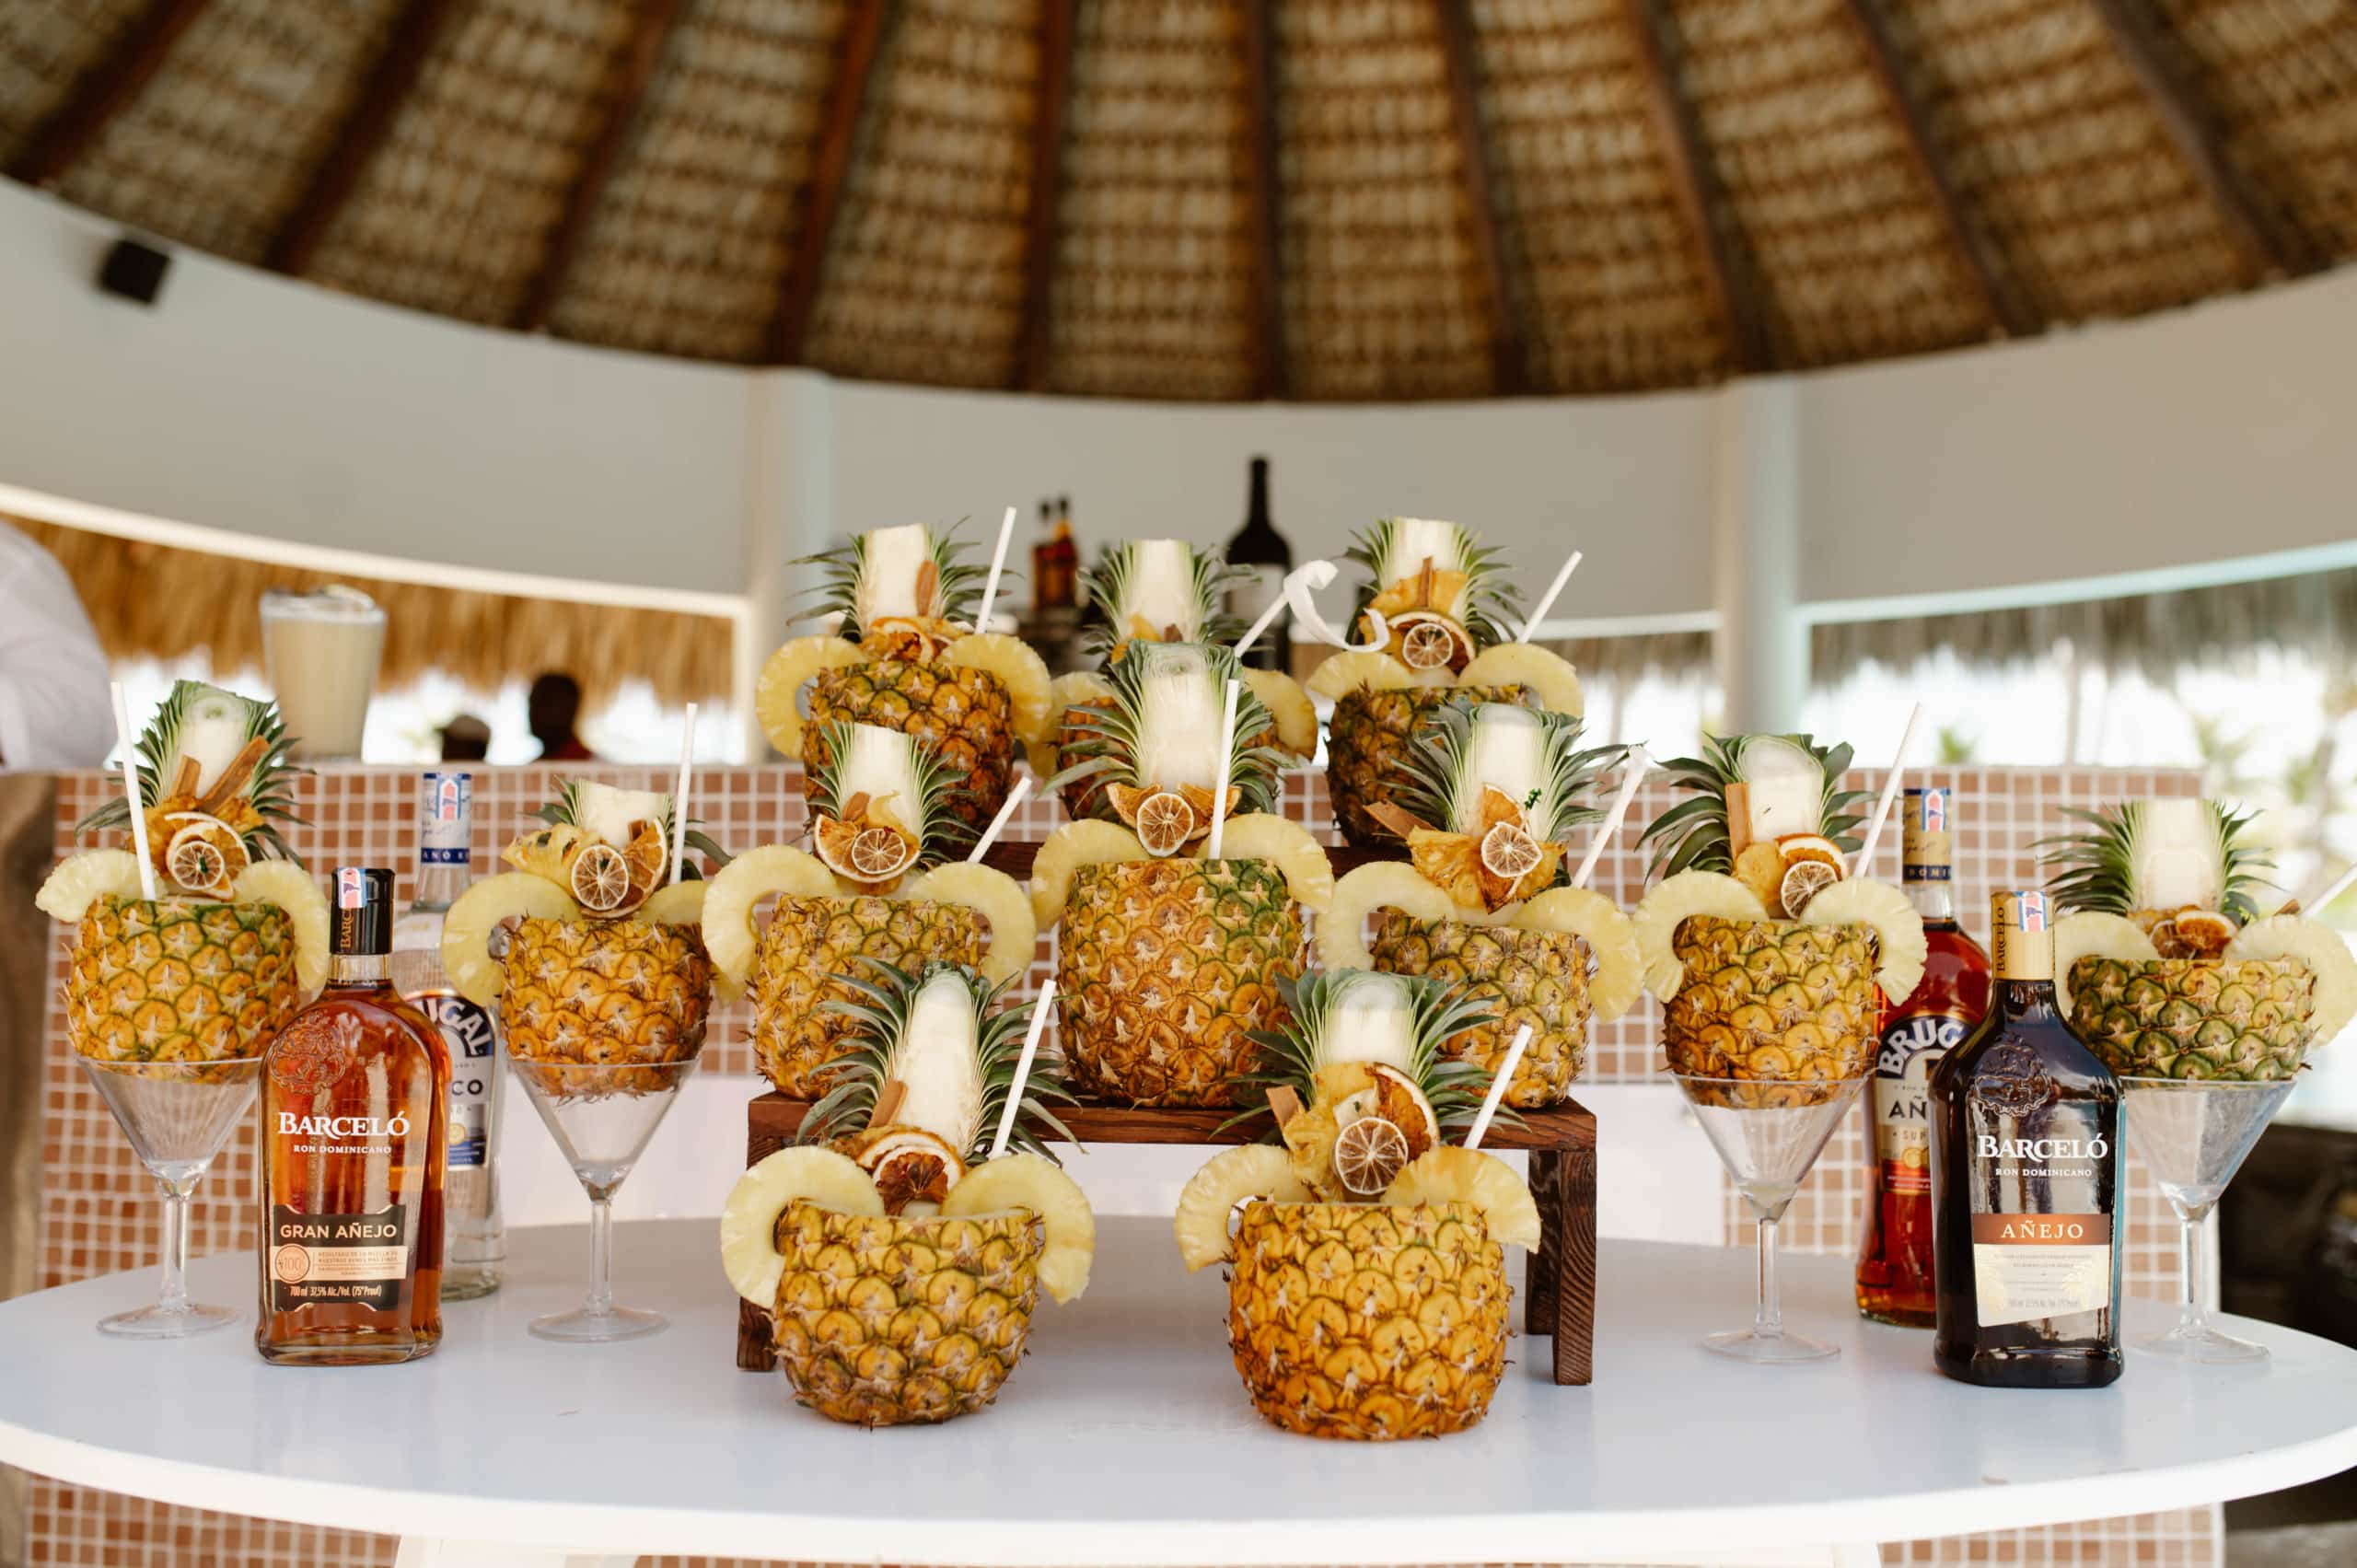 Rum cocktails at a destination wedding reception, served in pineapples